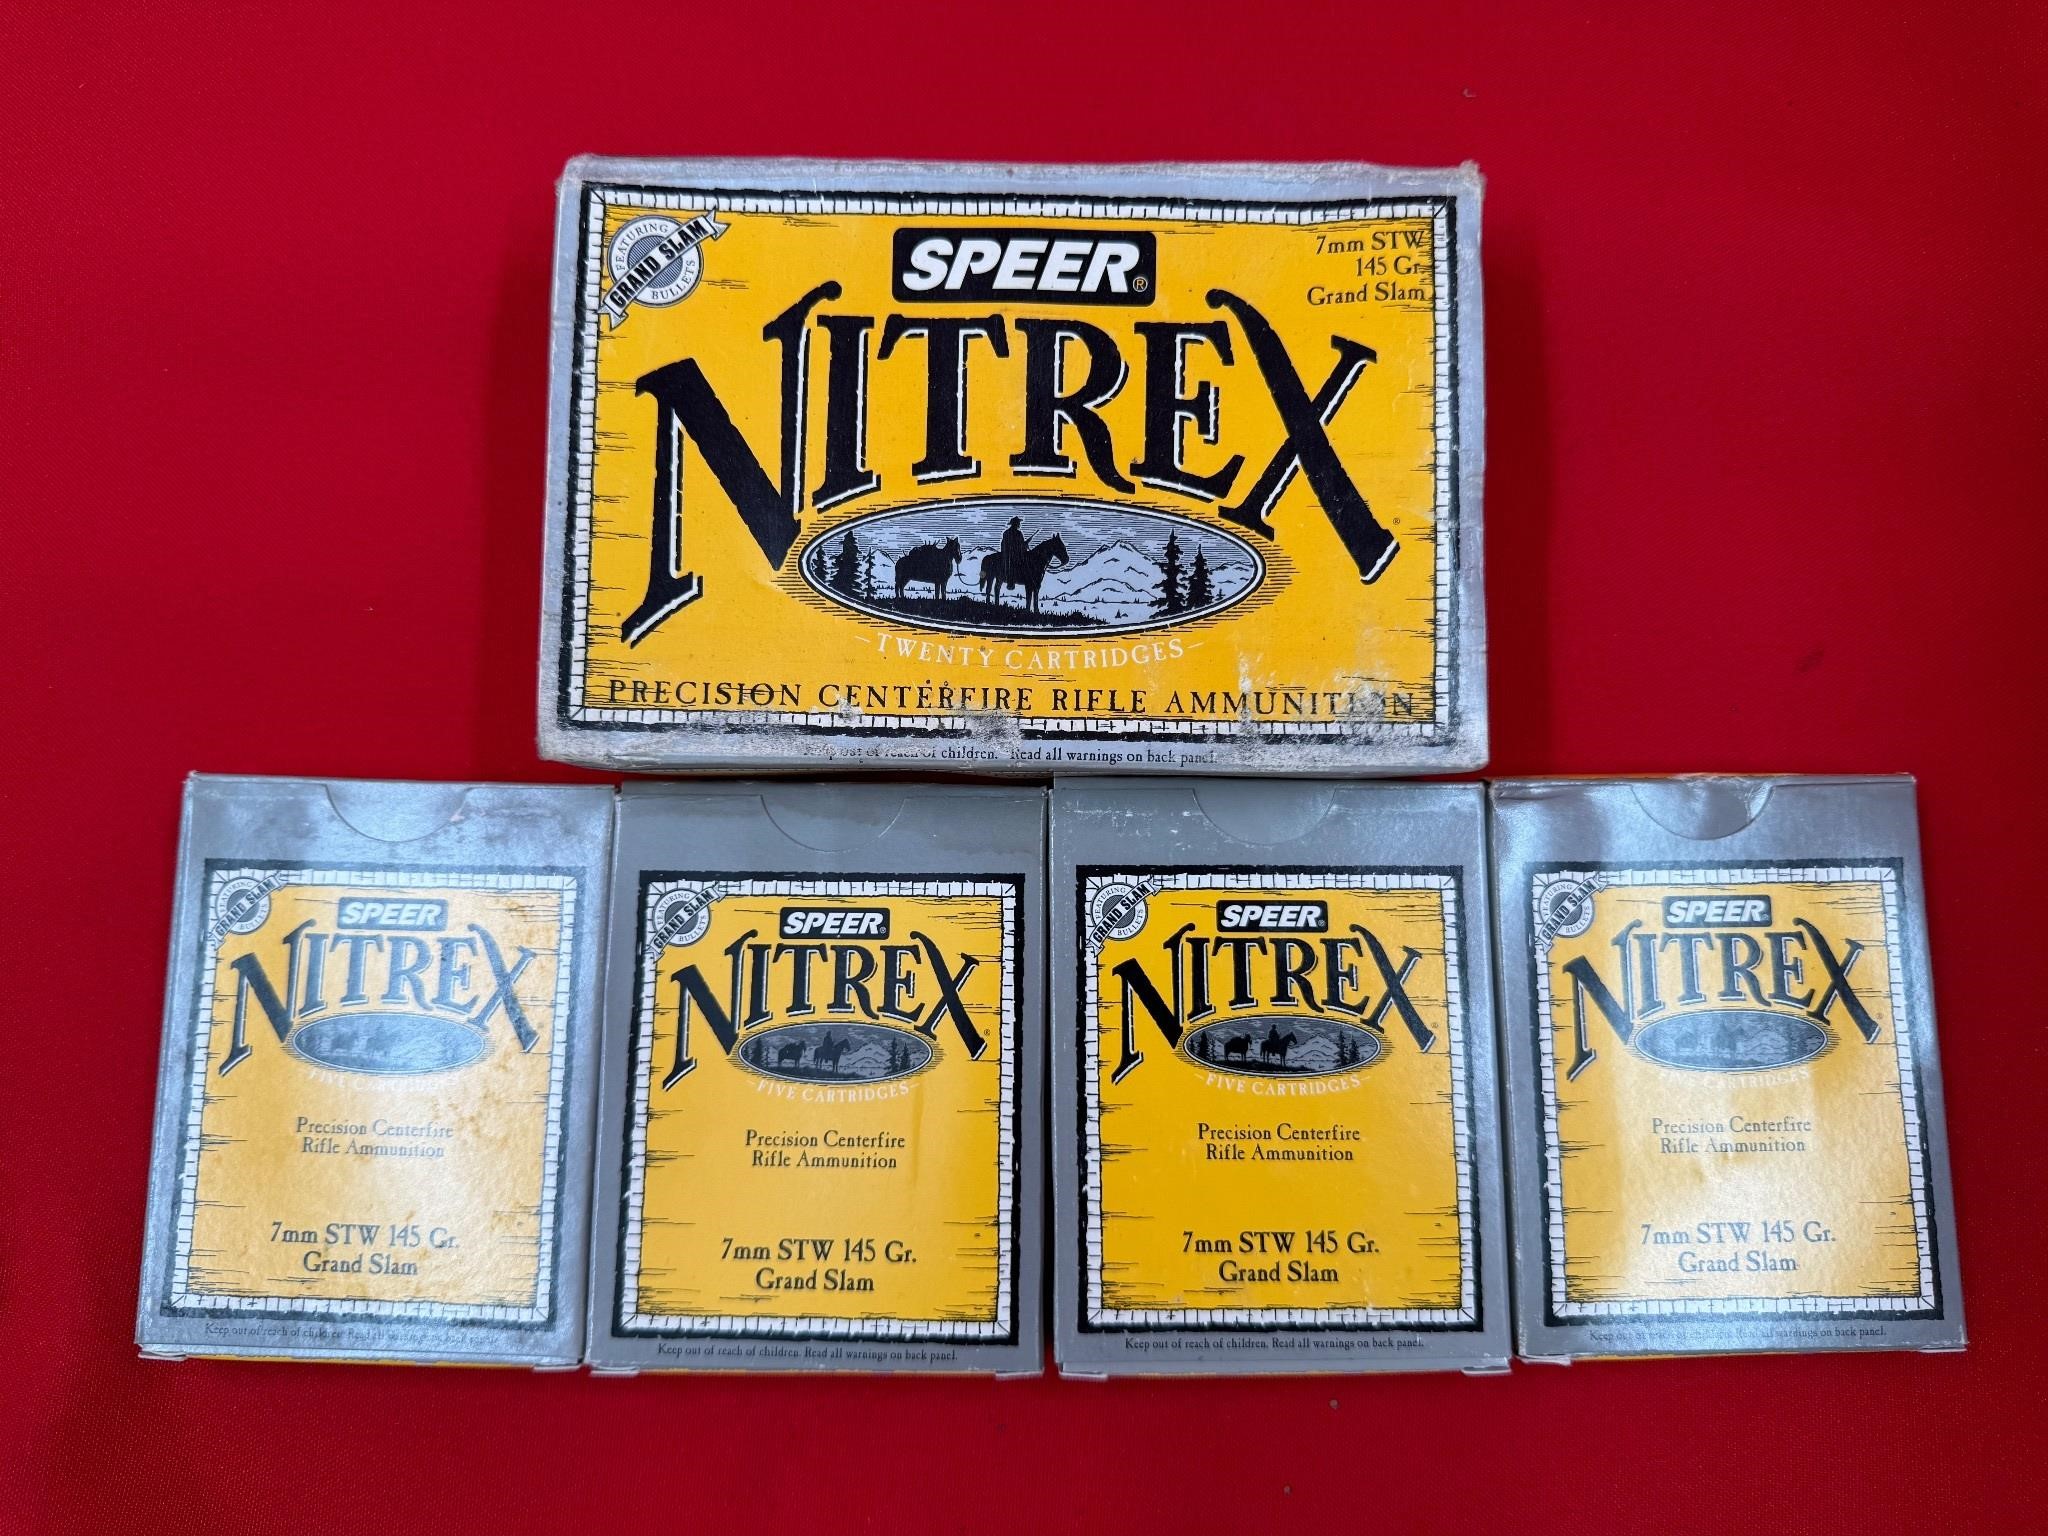 20 Rounds of Speer Nitrex Grand Slam 7MM STW Ammo